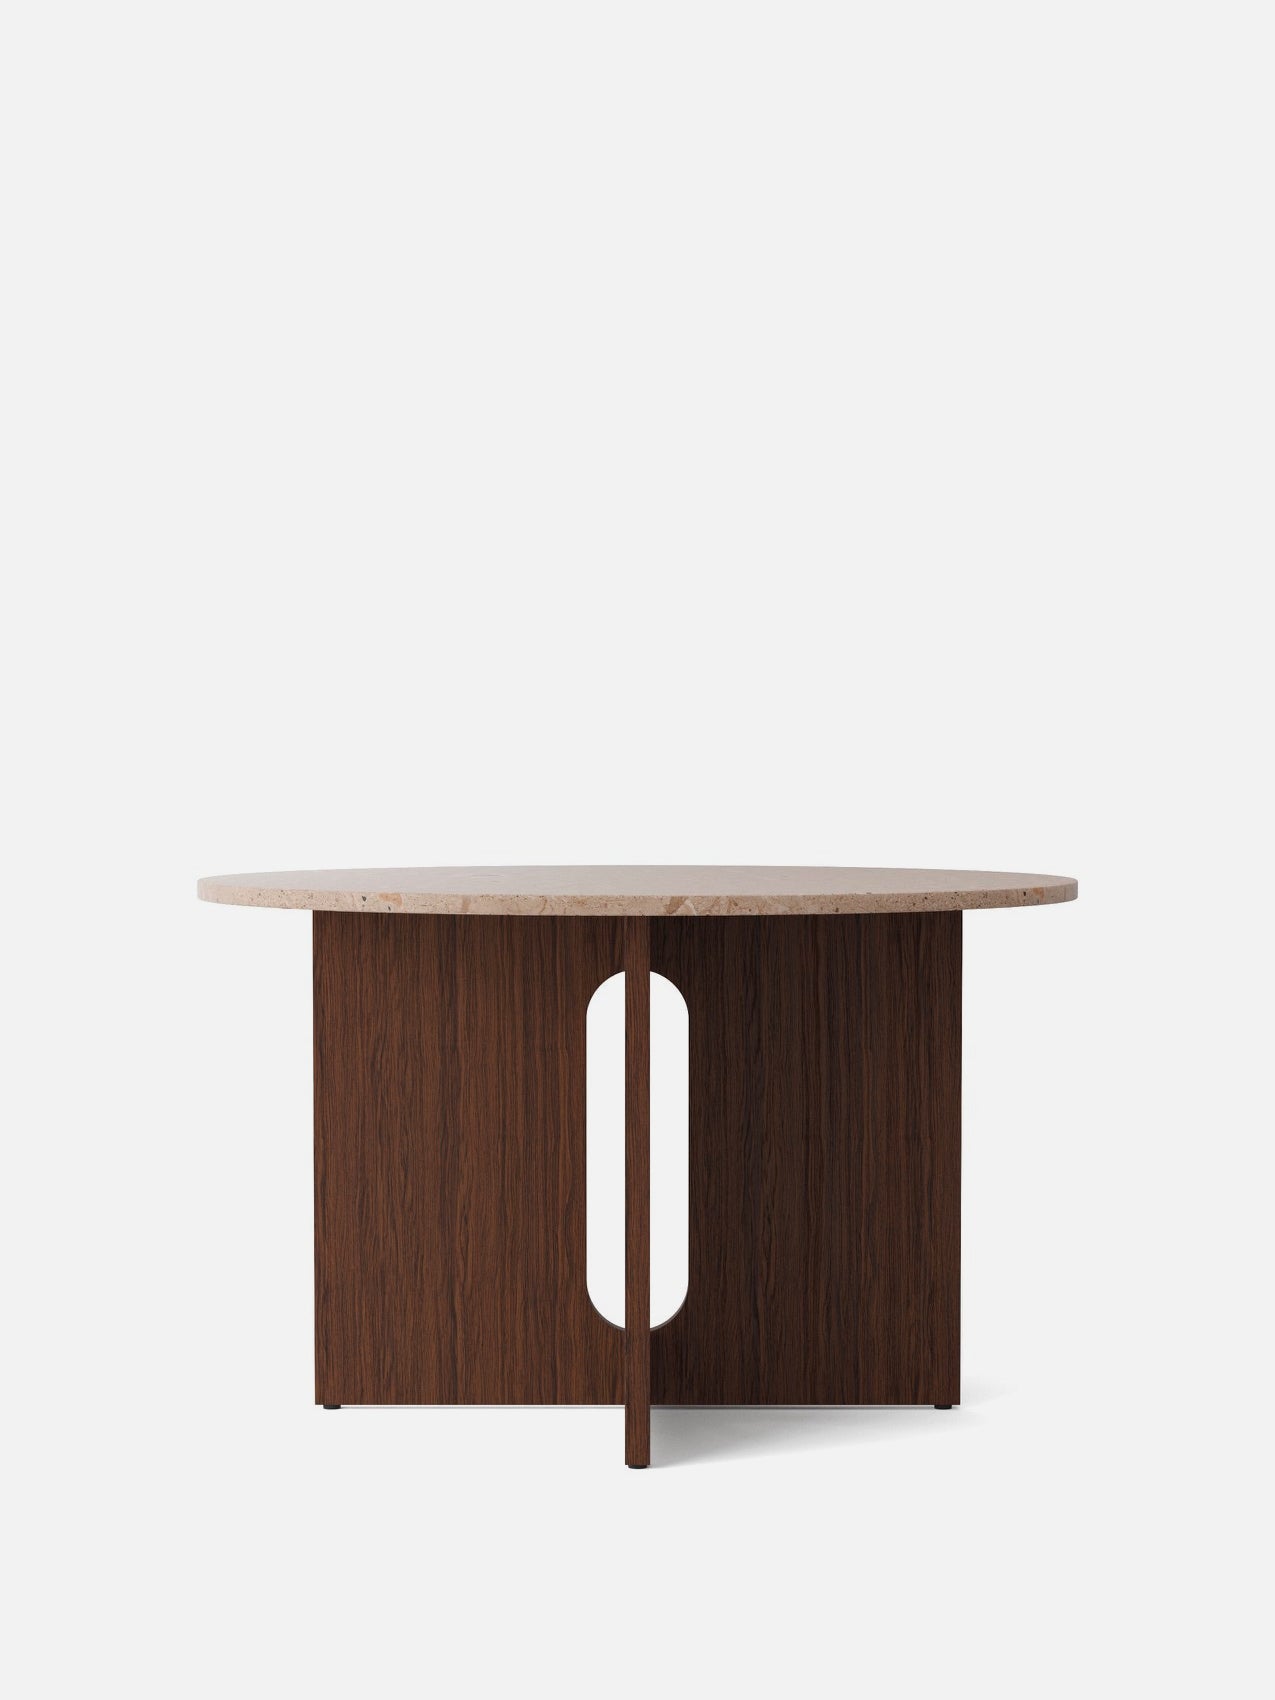 Androgyne Dining Table-Dining Table-Danielle Siggerud-Dining Height (47in)/Dark Stained Oak-Round - Sand Stone-menu-minimalist-modern-danish-design-home-decor